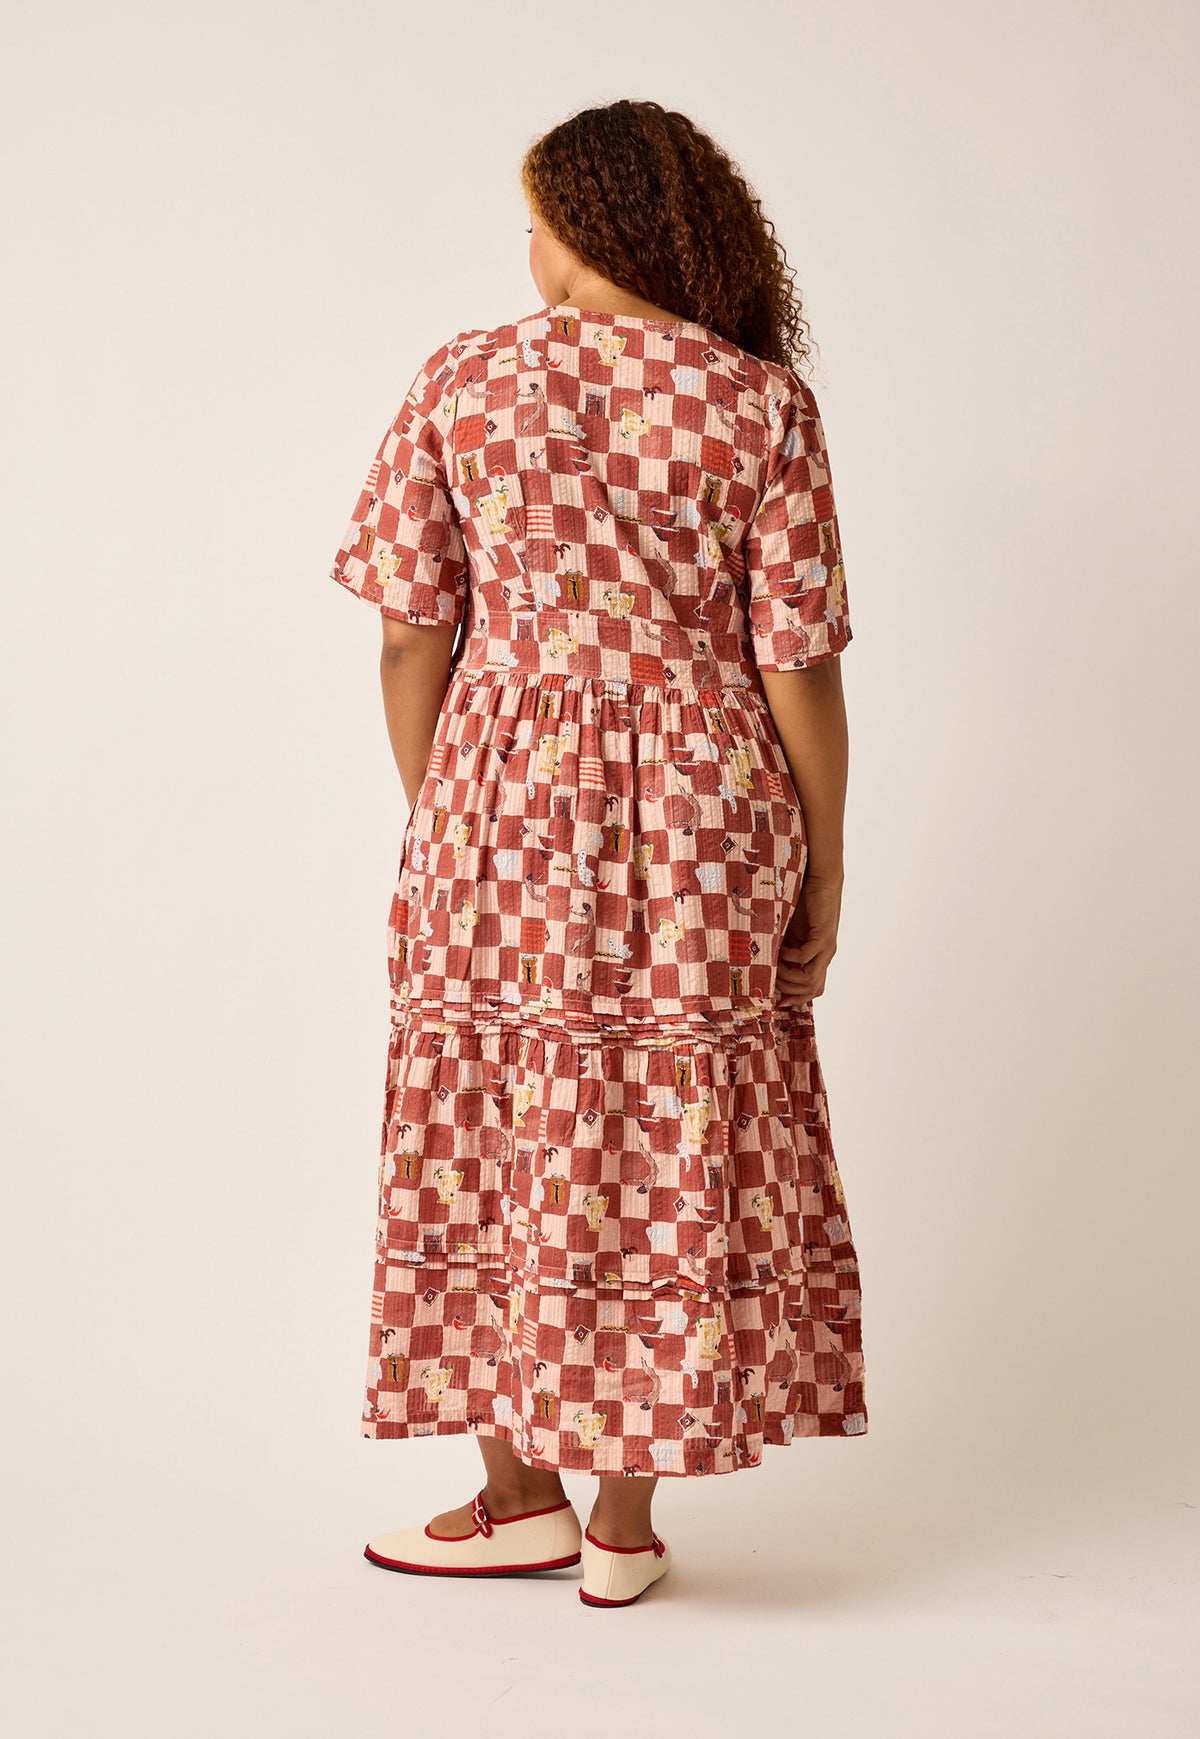 Tiered Mabel Dress - Heartbeat Check